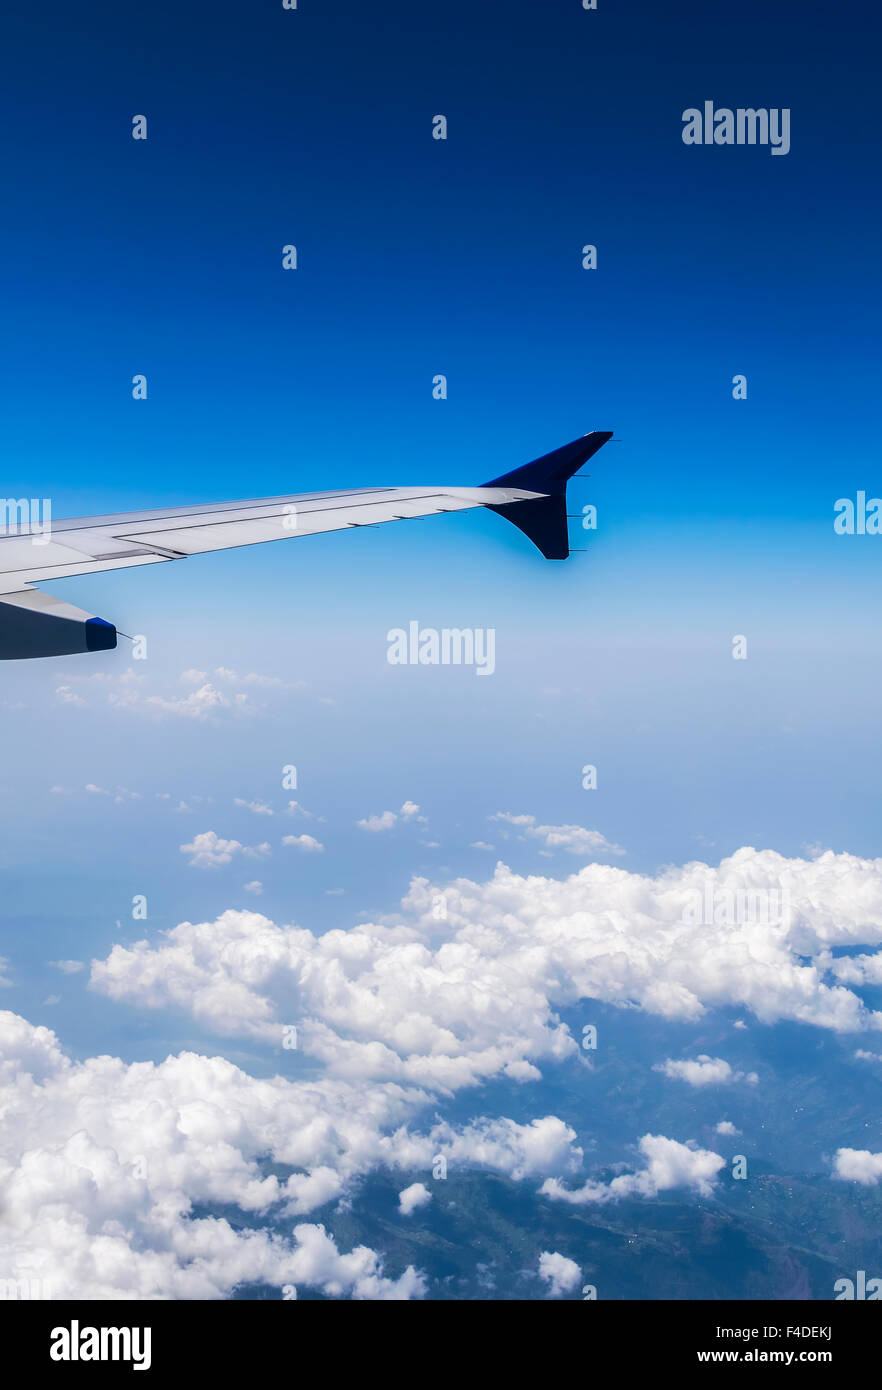 Wing of a Flying Airplane above clouds over Himalayan Mountains Stock Photo